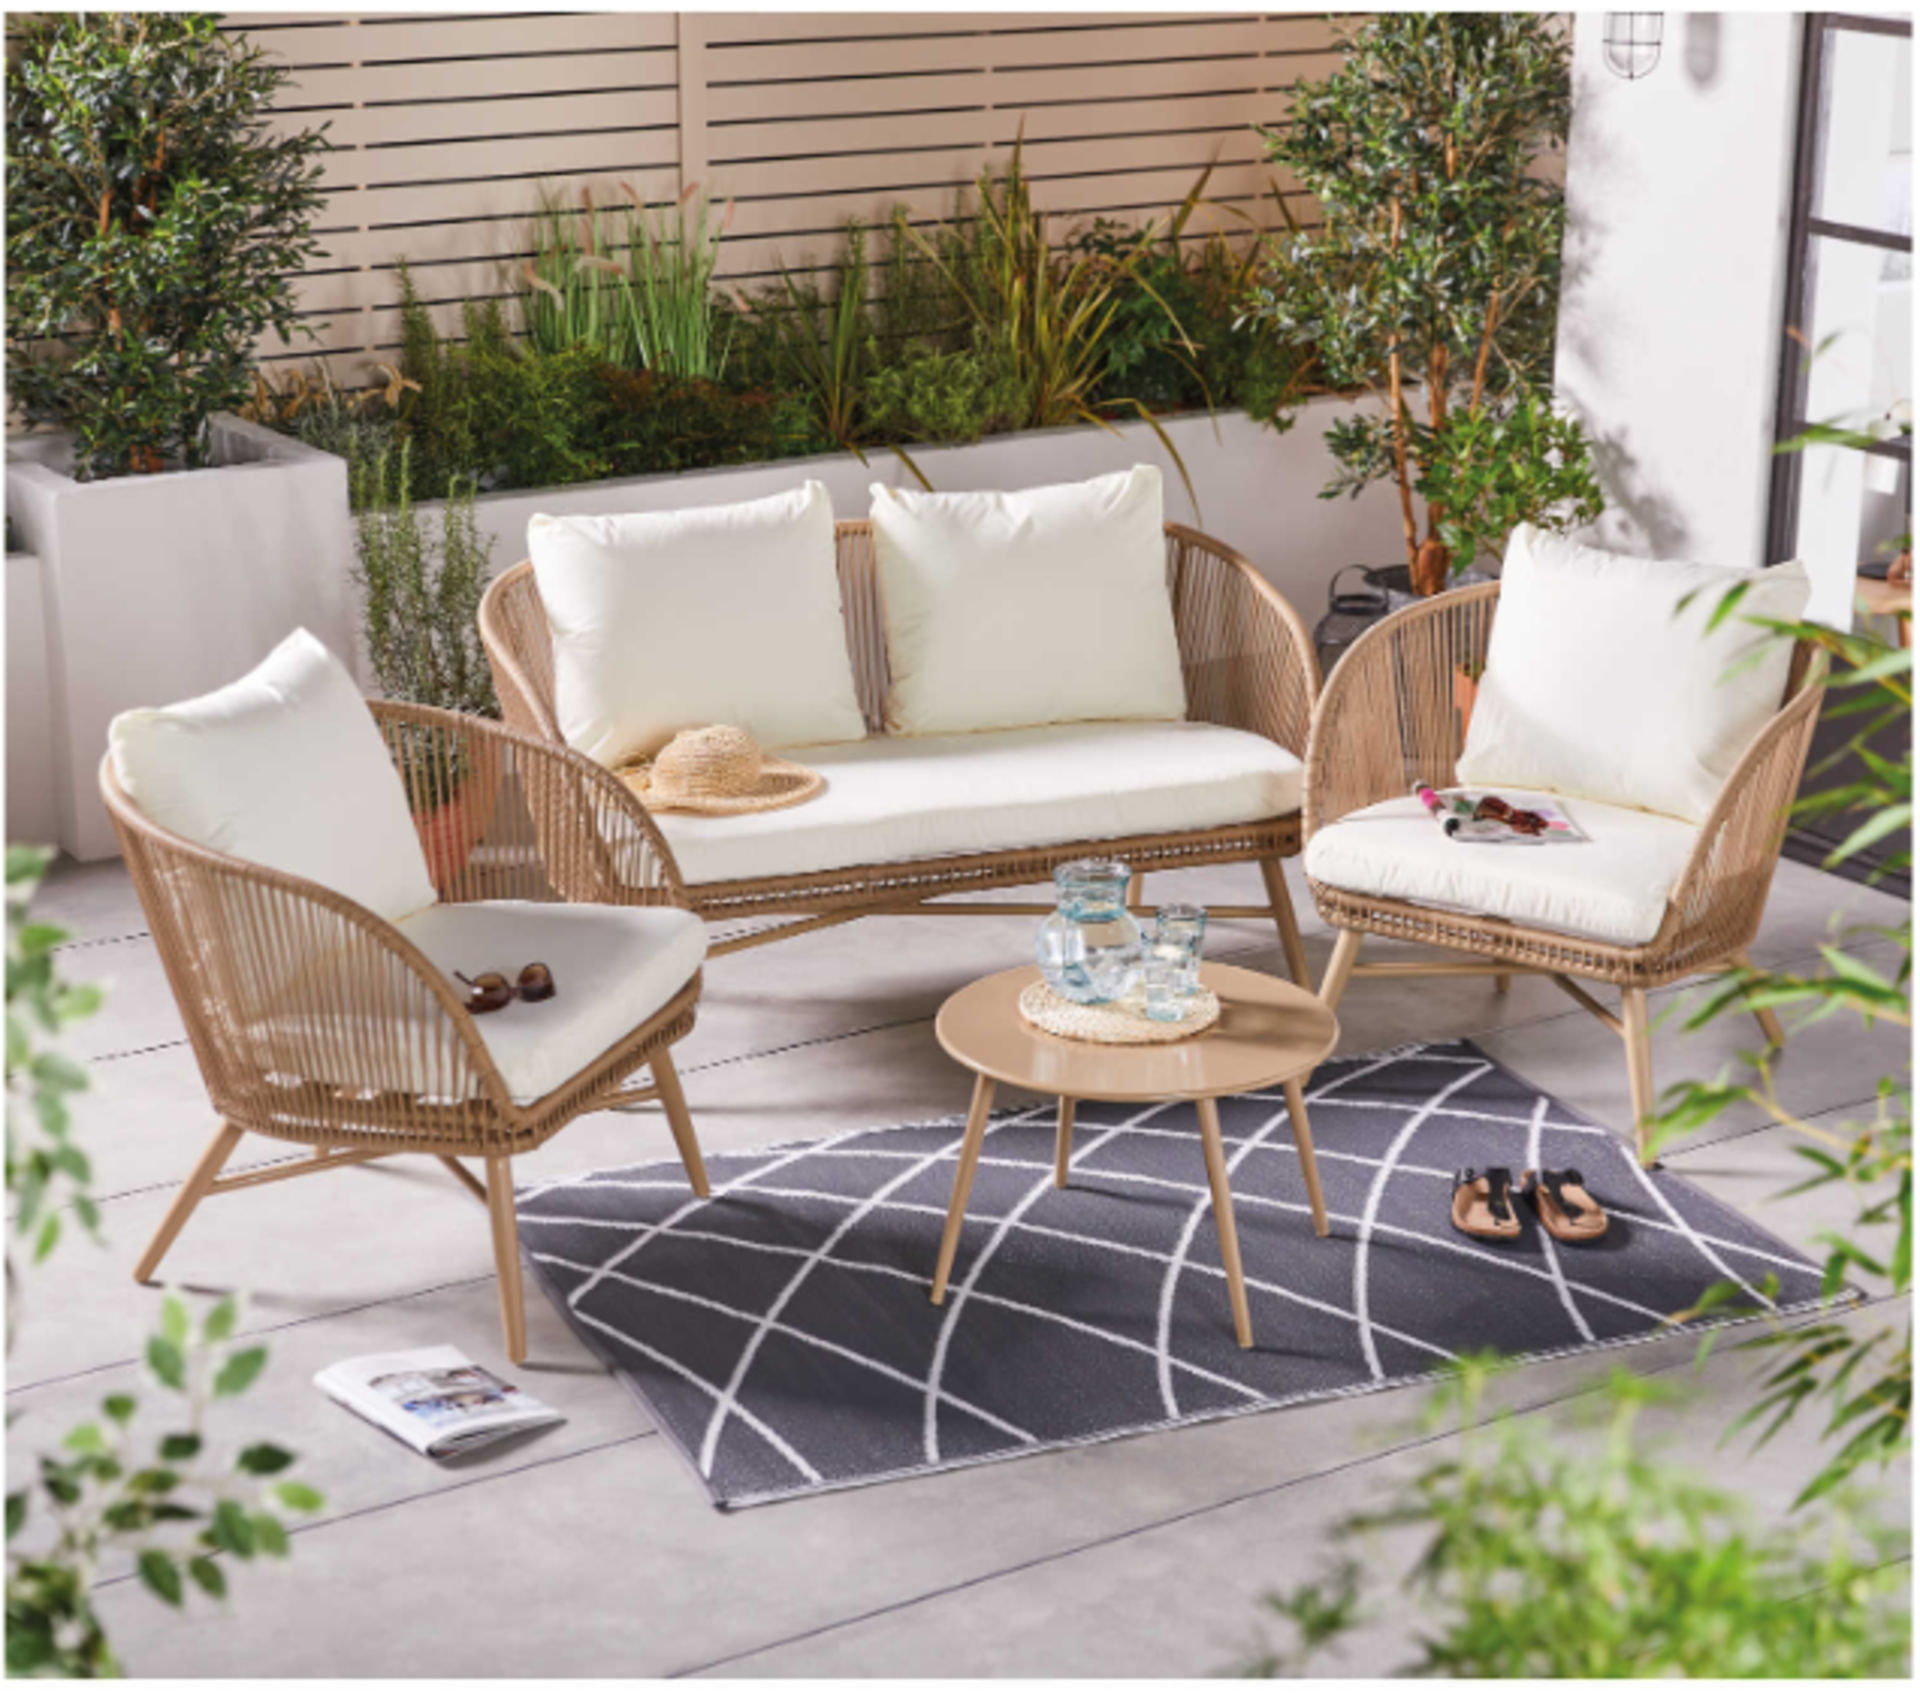 Rope Effect Furniture Set. Enjoy those lazy days in the garden with this comfortable and stylish